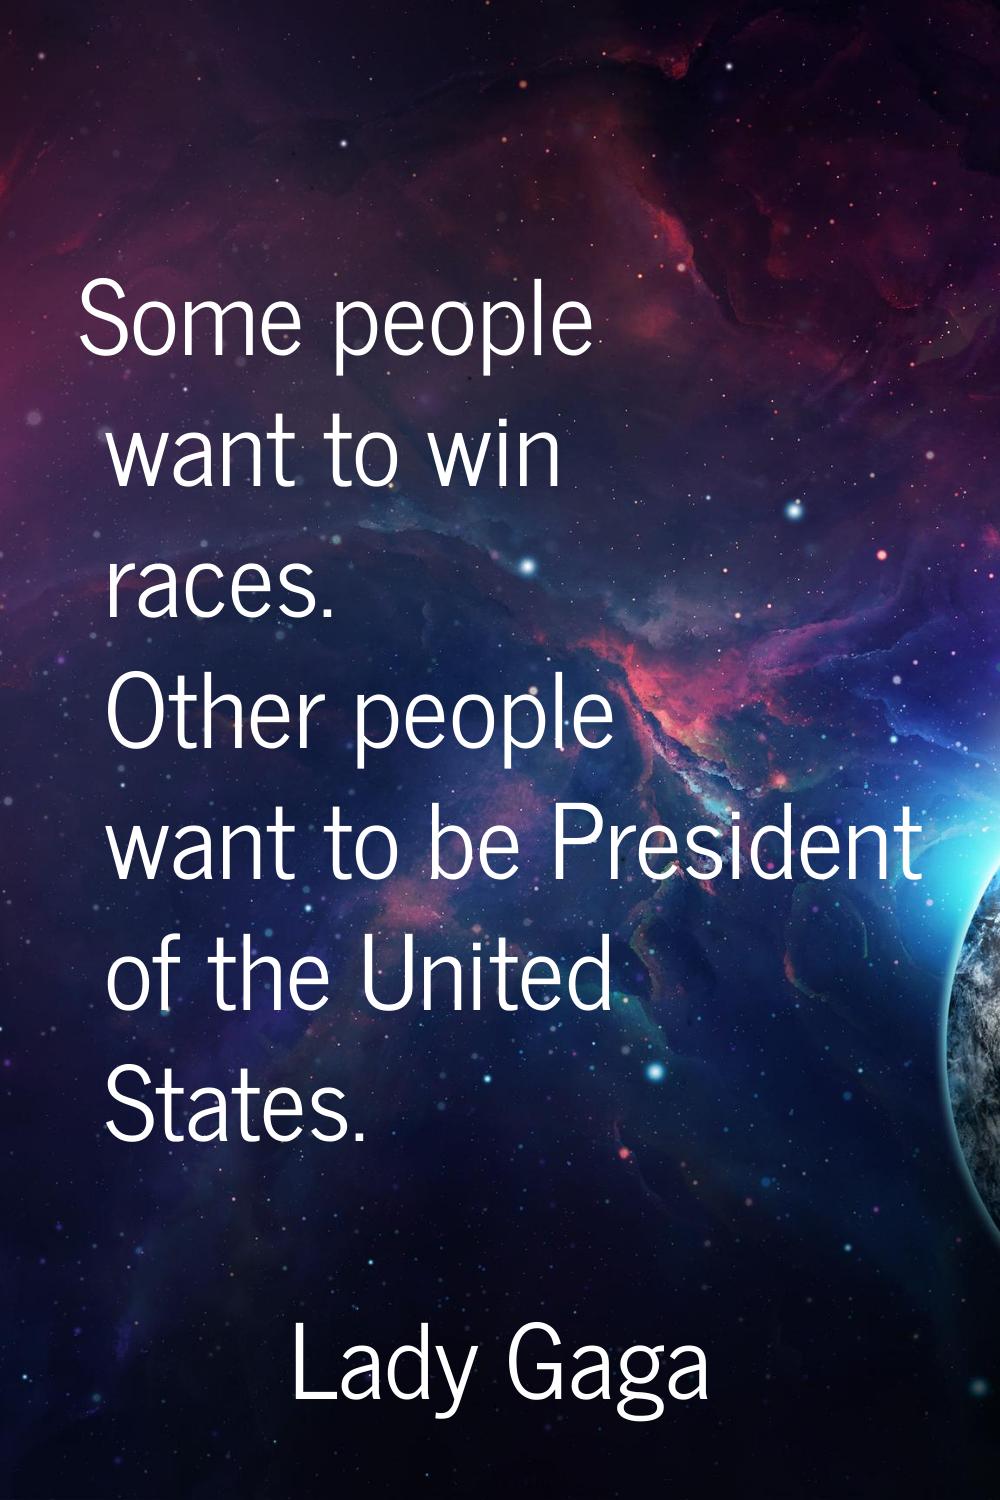 Some people want to win races. Other people want to be President of the United States.